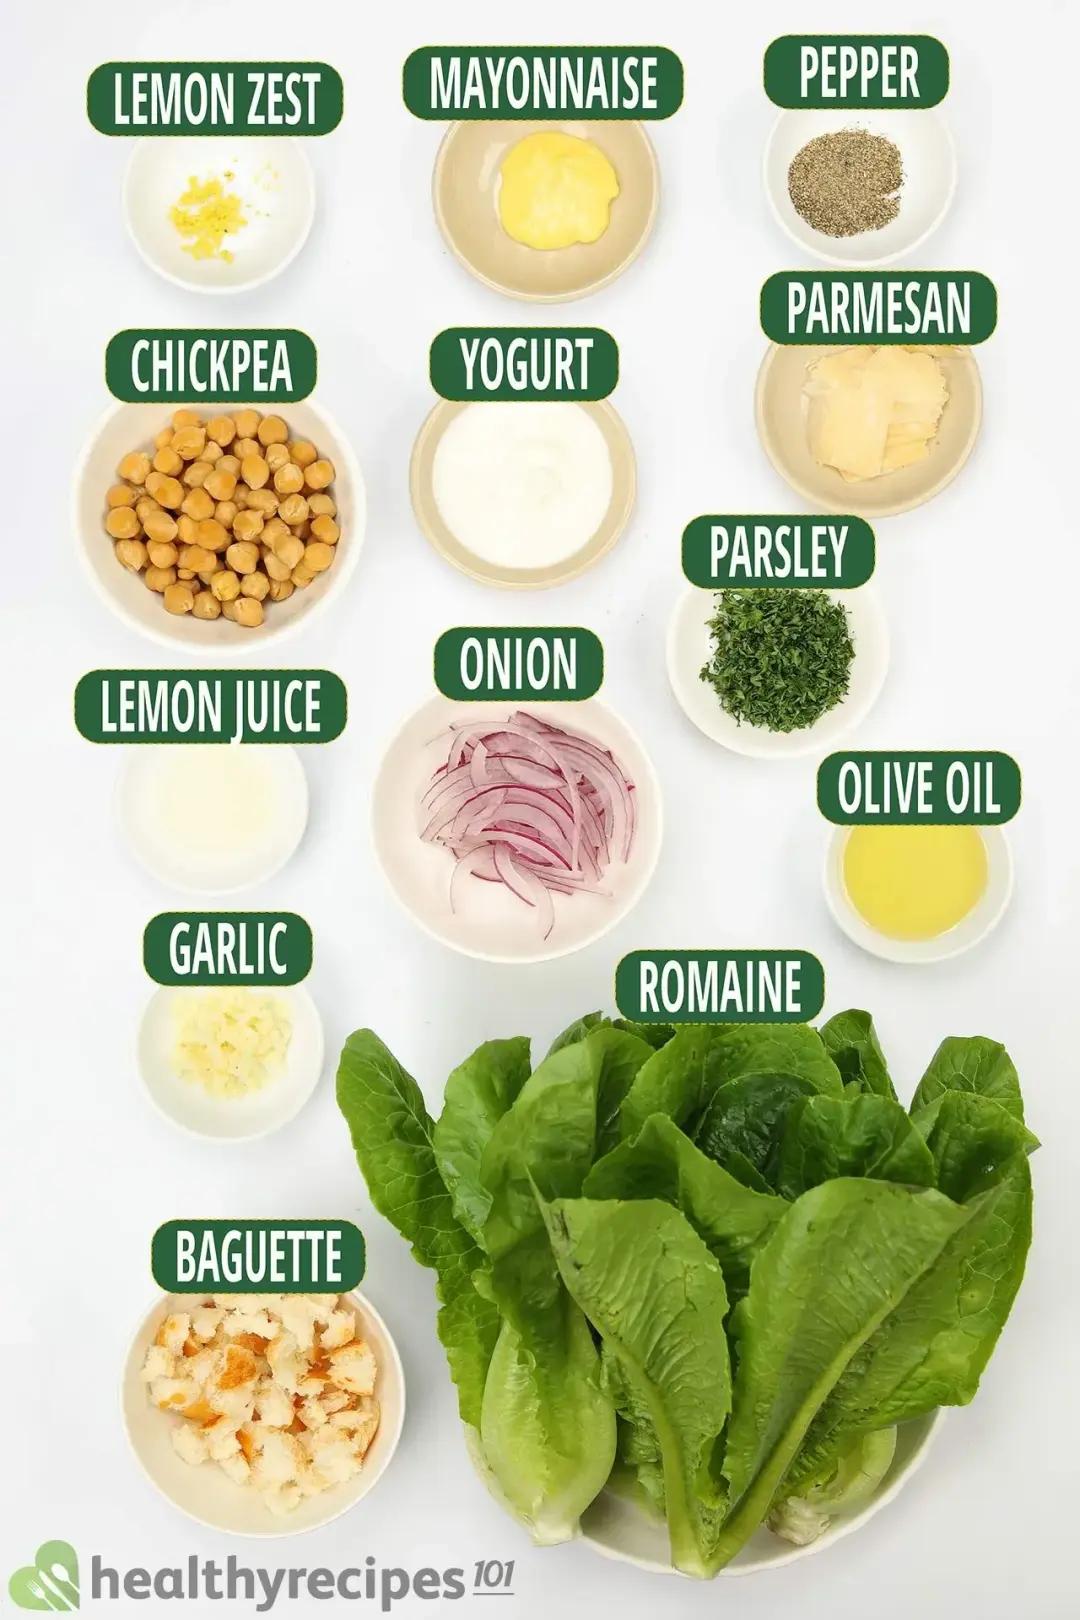 Ingredients for Grilled Romaine Salad